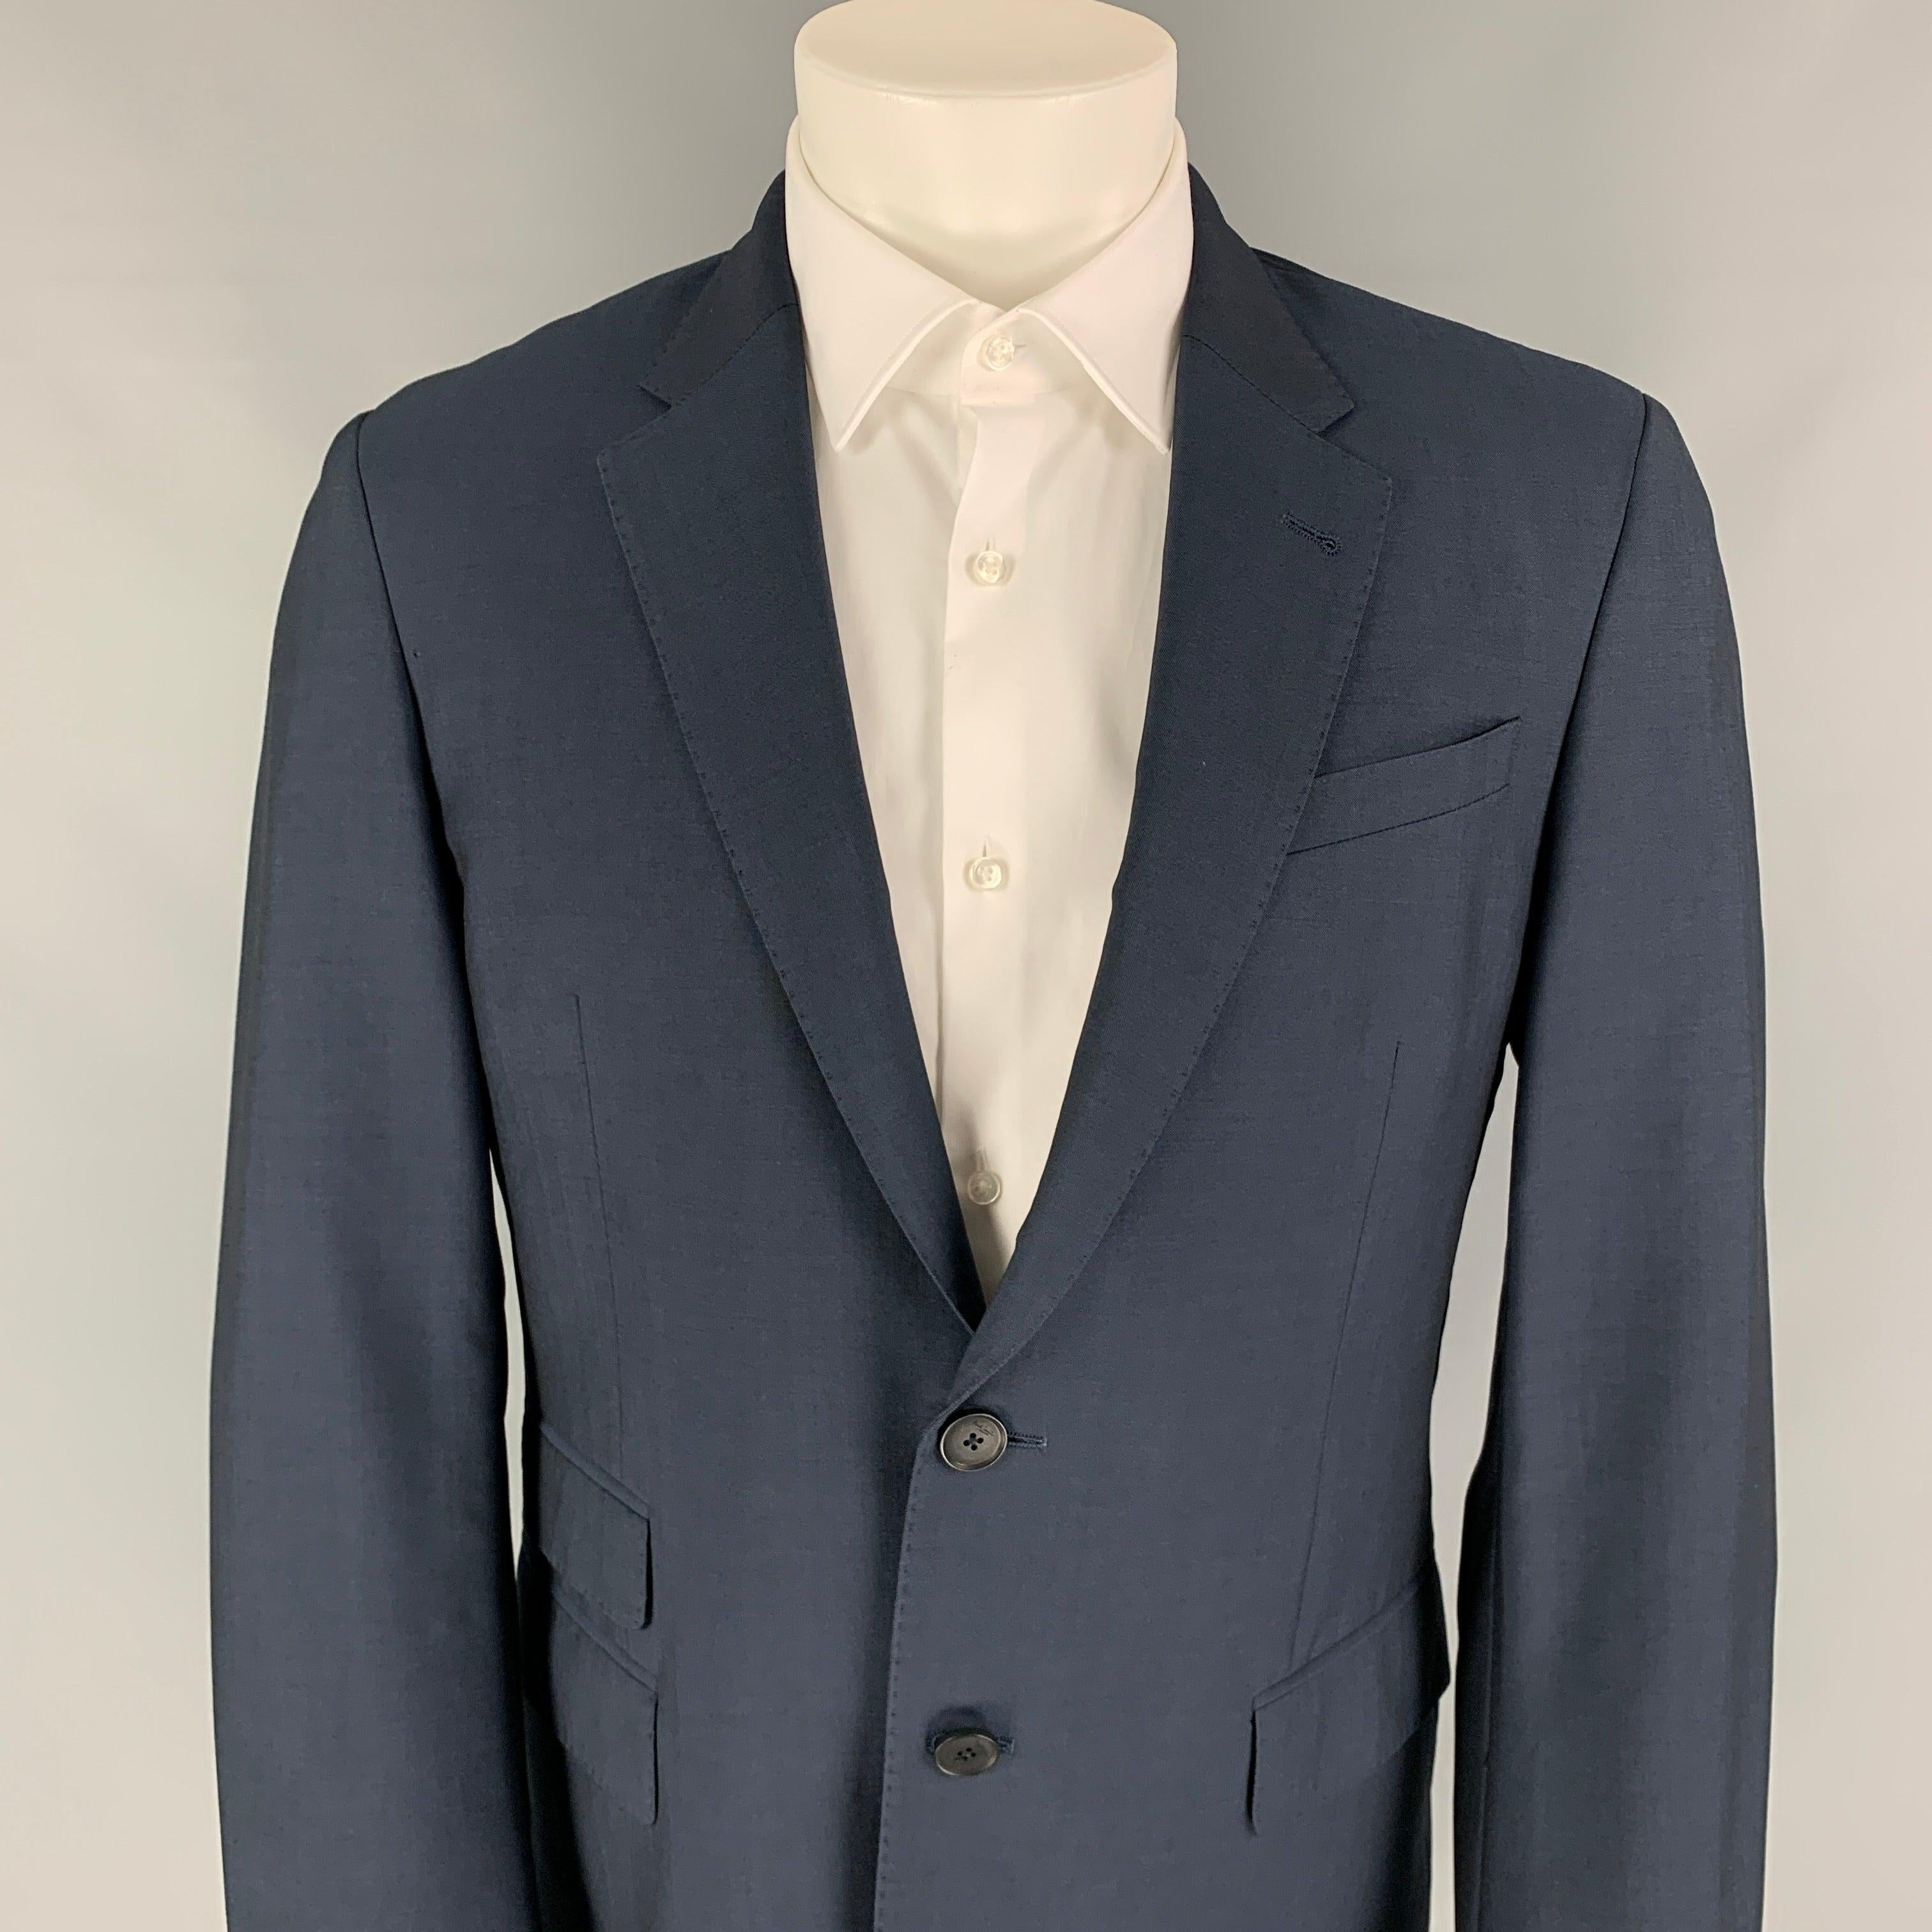 PAUL SMITH sport coat comes in a steel blue wool with a full liner featuring a notch lapel, flap pockets, single back vent, and a double button closure. Made in Italy.
Excellent
Pre-Owned Condition. 

Marked:   R 40  

Measurements: 
 
Shoulder: 18